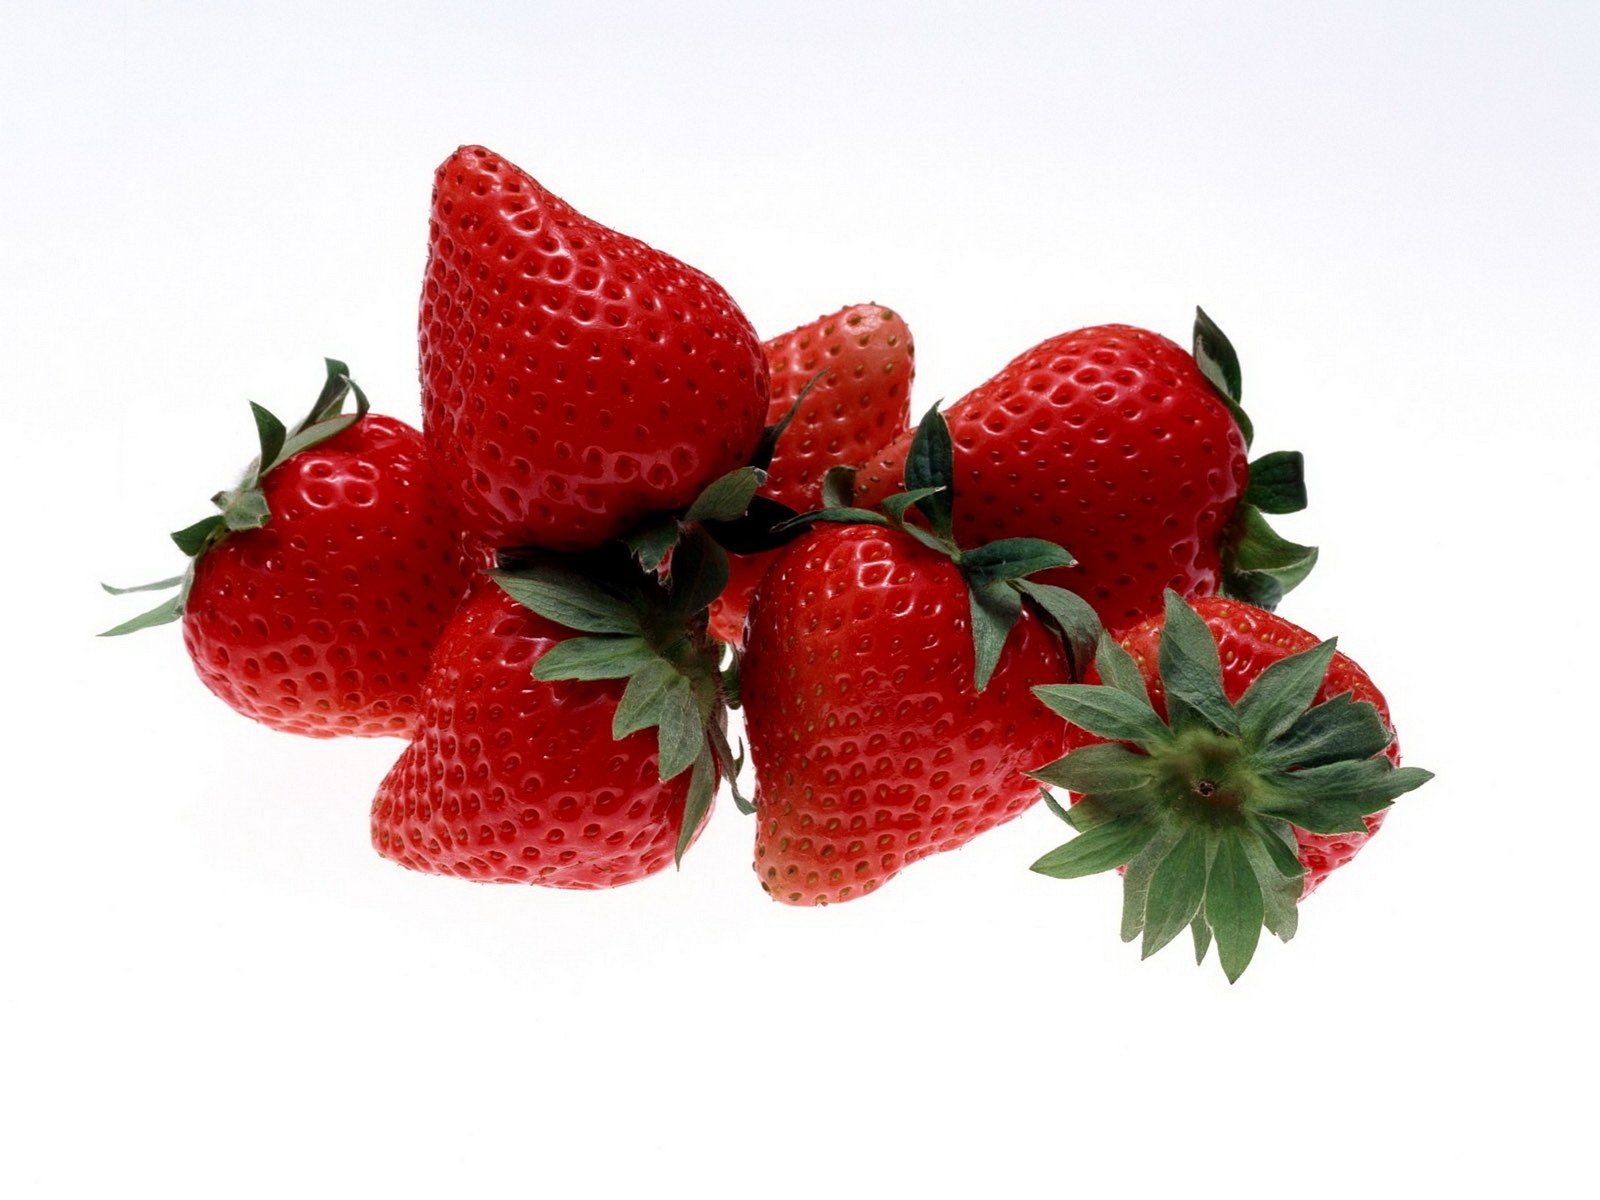 fruits, food, strawberry, berries, white